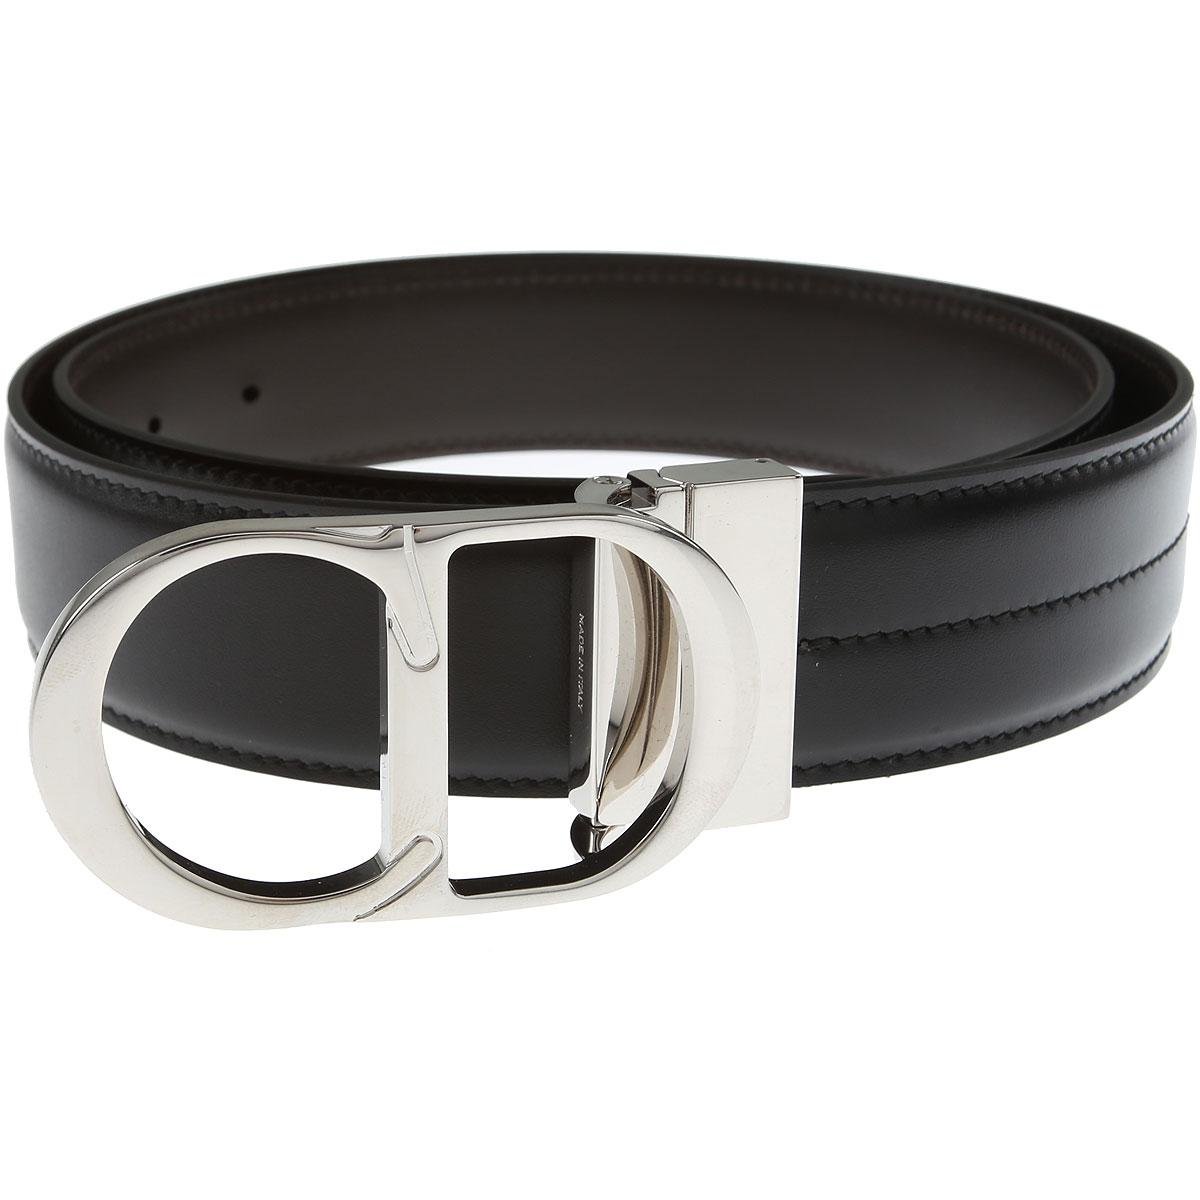 How Much Is Dior? Christian Dior Price Guide dior belt